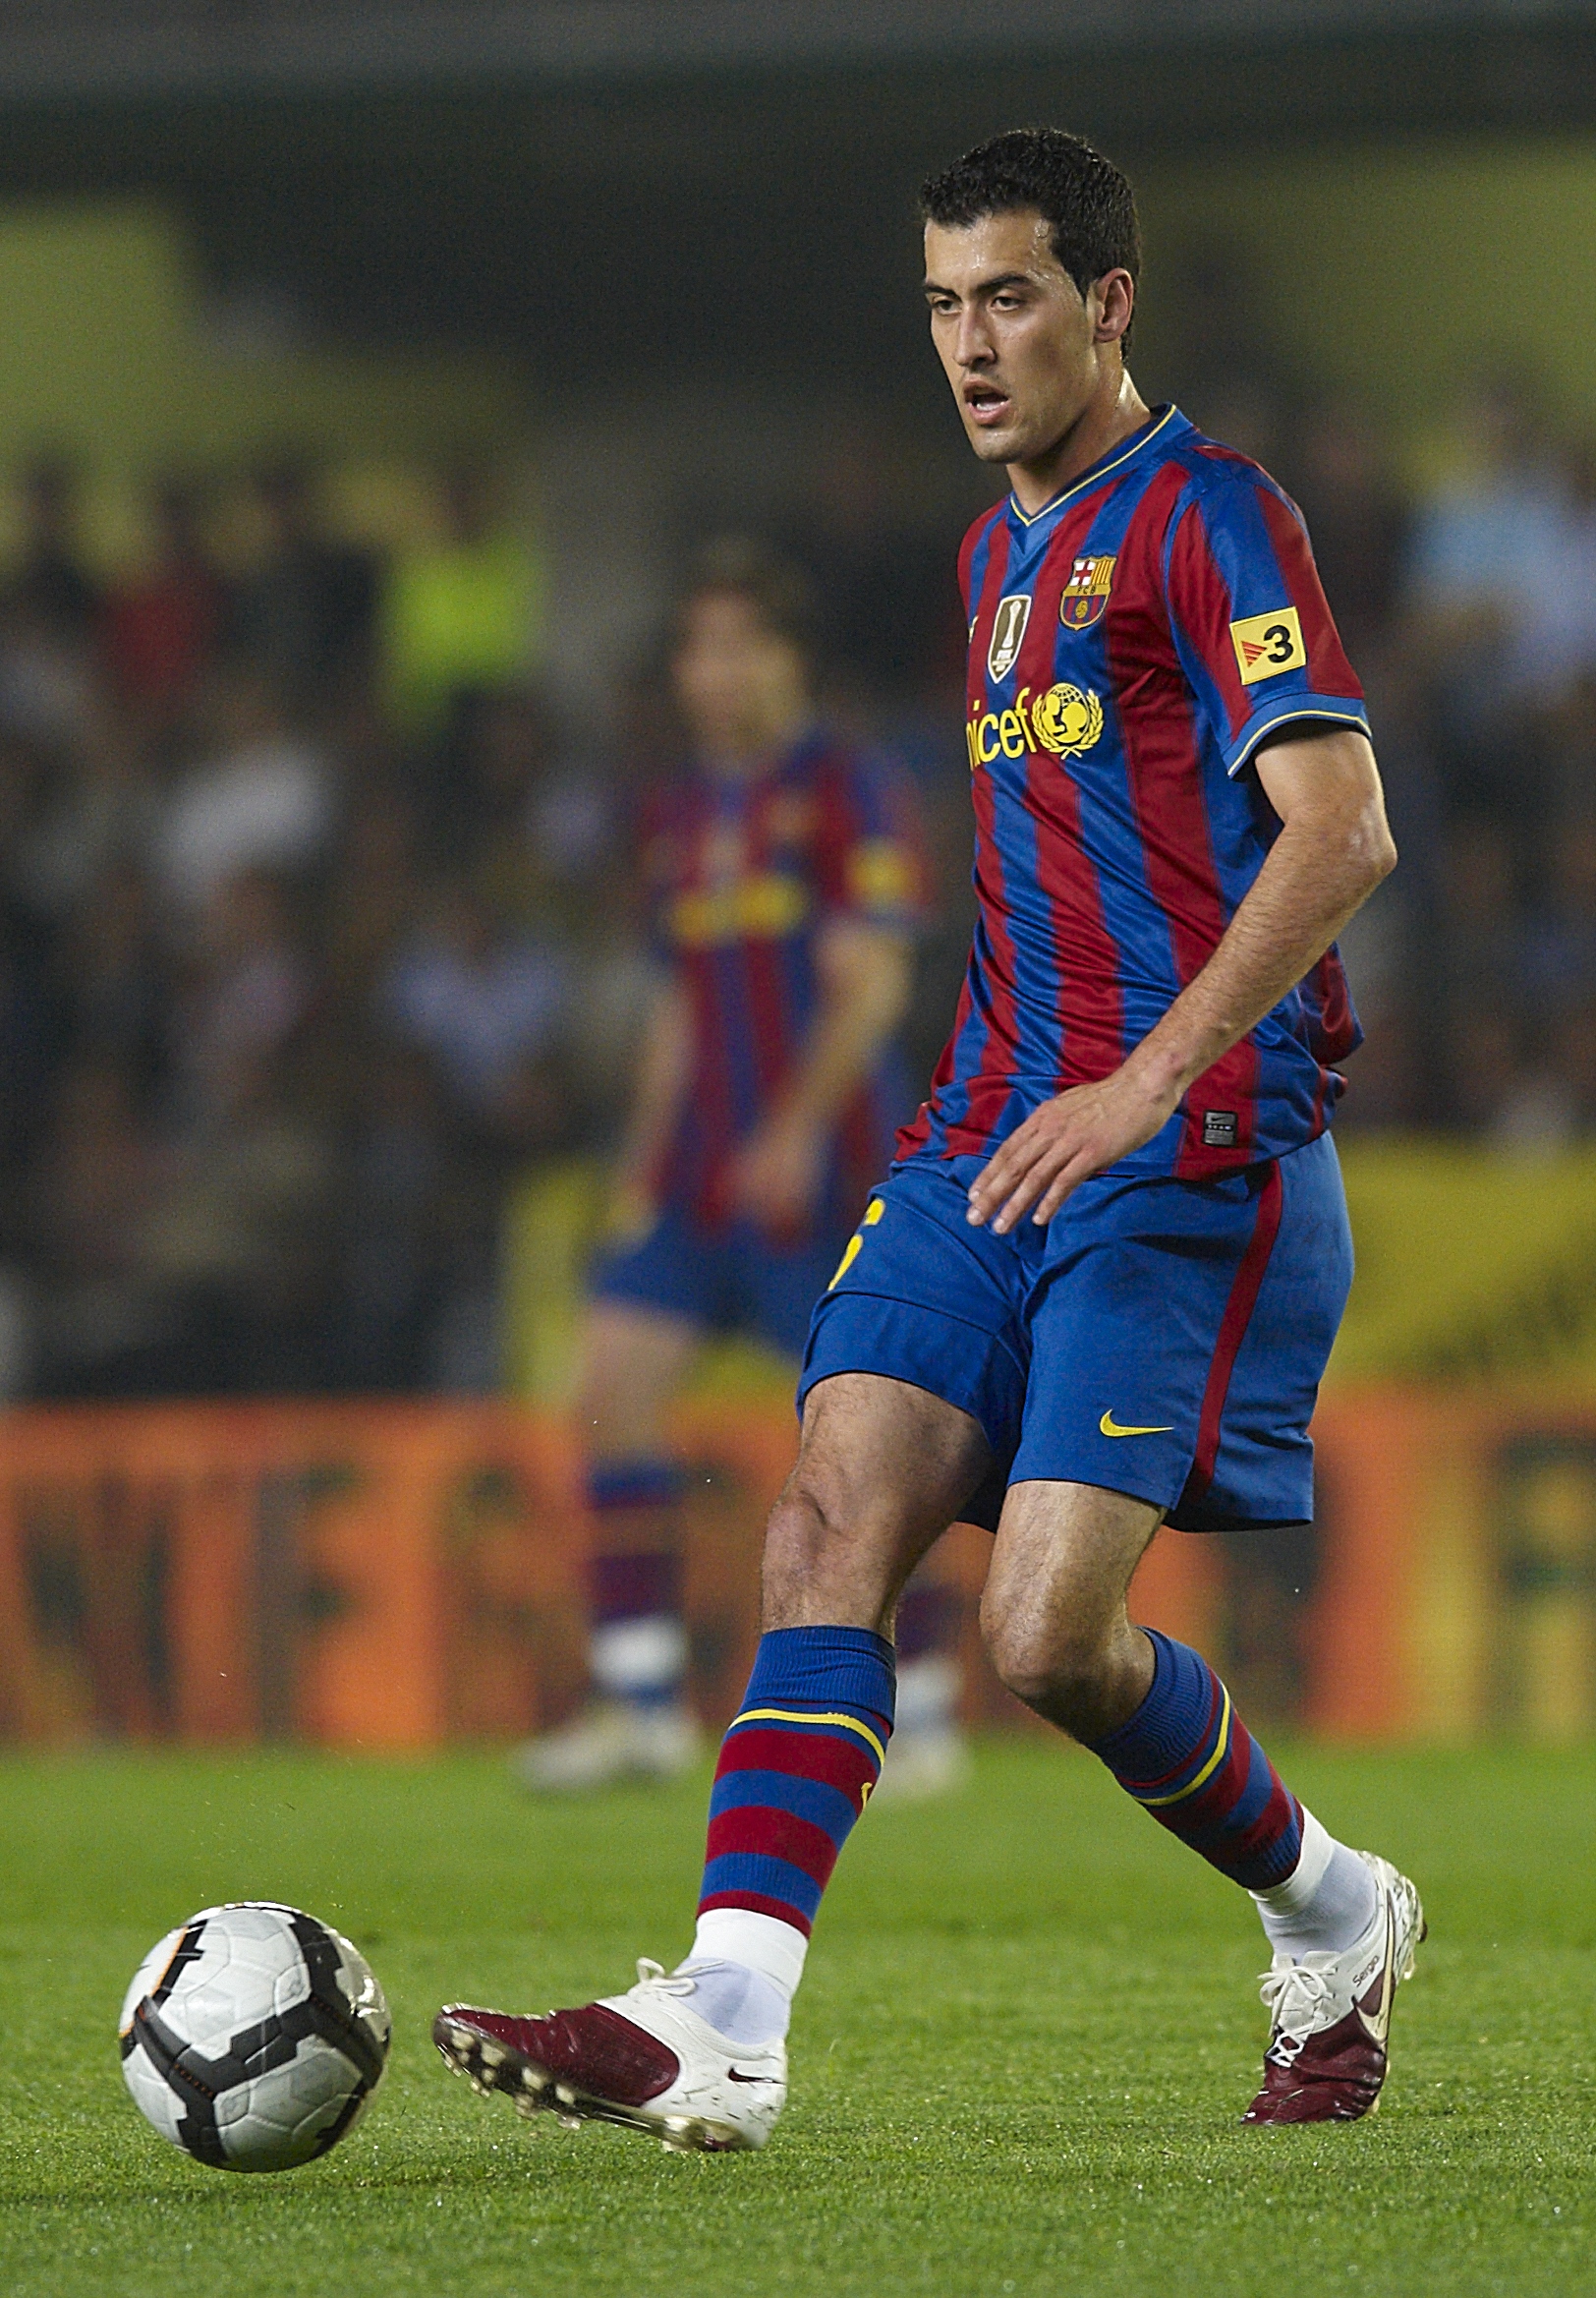 VILLARREAL, SPAIN - MAY 01:  Sergio Busquets of FC Barcelona in action during the La Liga match between Villarreal CF and FC Barcelona at El Madrigal stadium on May 1, 2010 in Villarreal, Spain.  (Photo by Manuel Queimadelos Alonso/Getty Images)